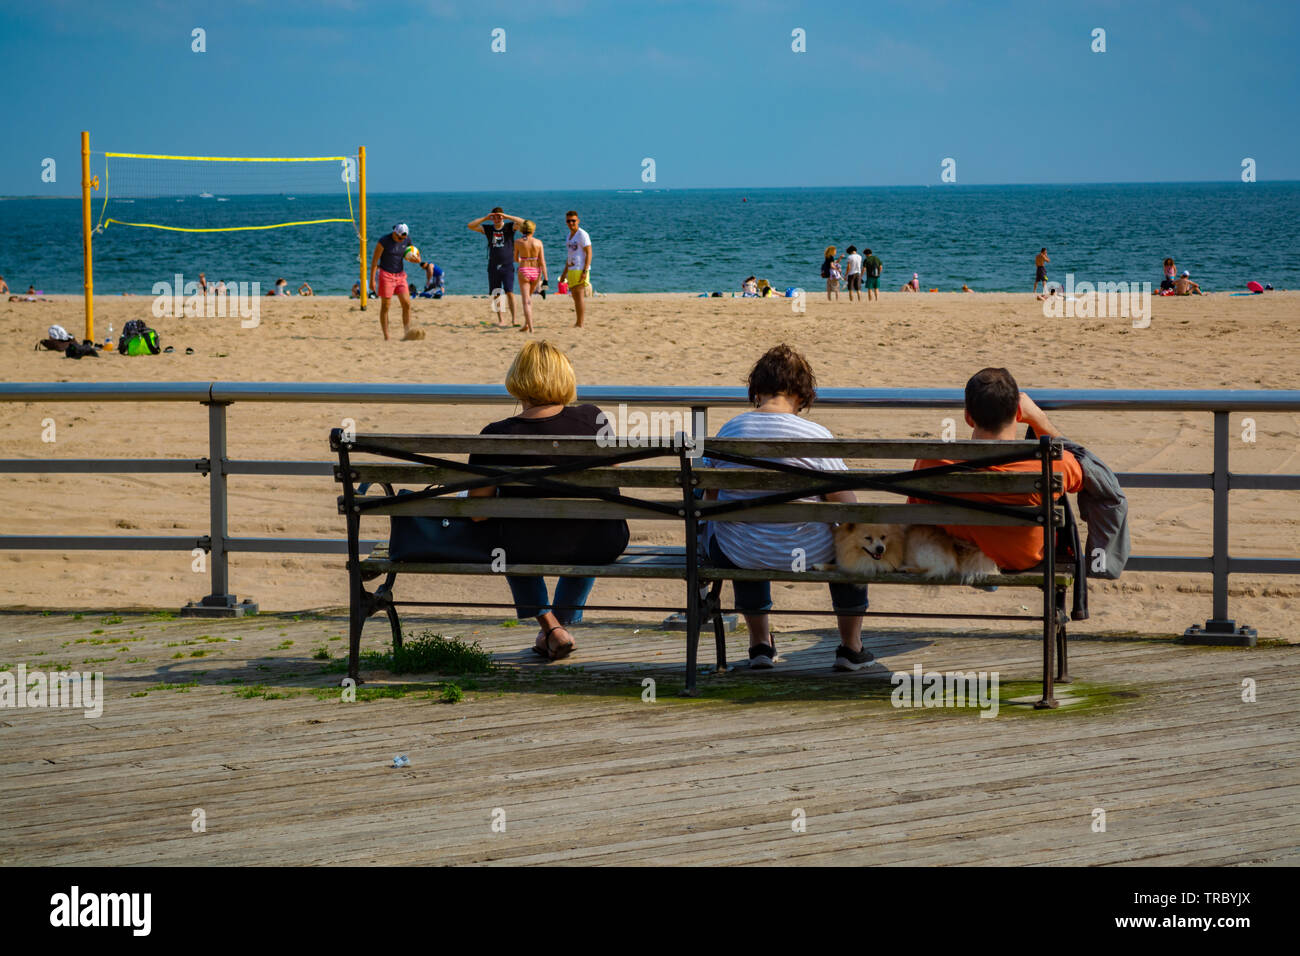 Two woman, man and the dog between them are sitting on the Bench in front of the beach and watching people play volleyball. Stock Photo